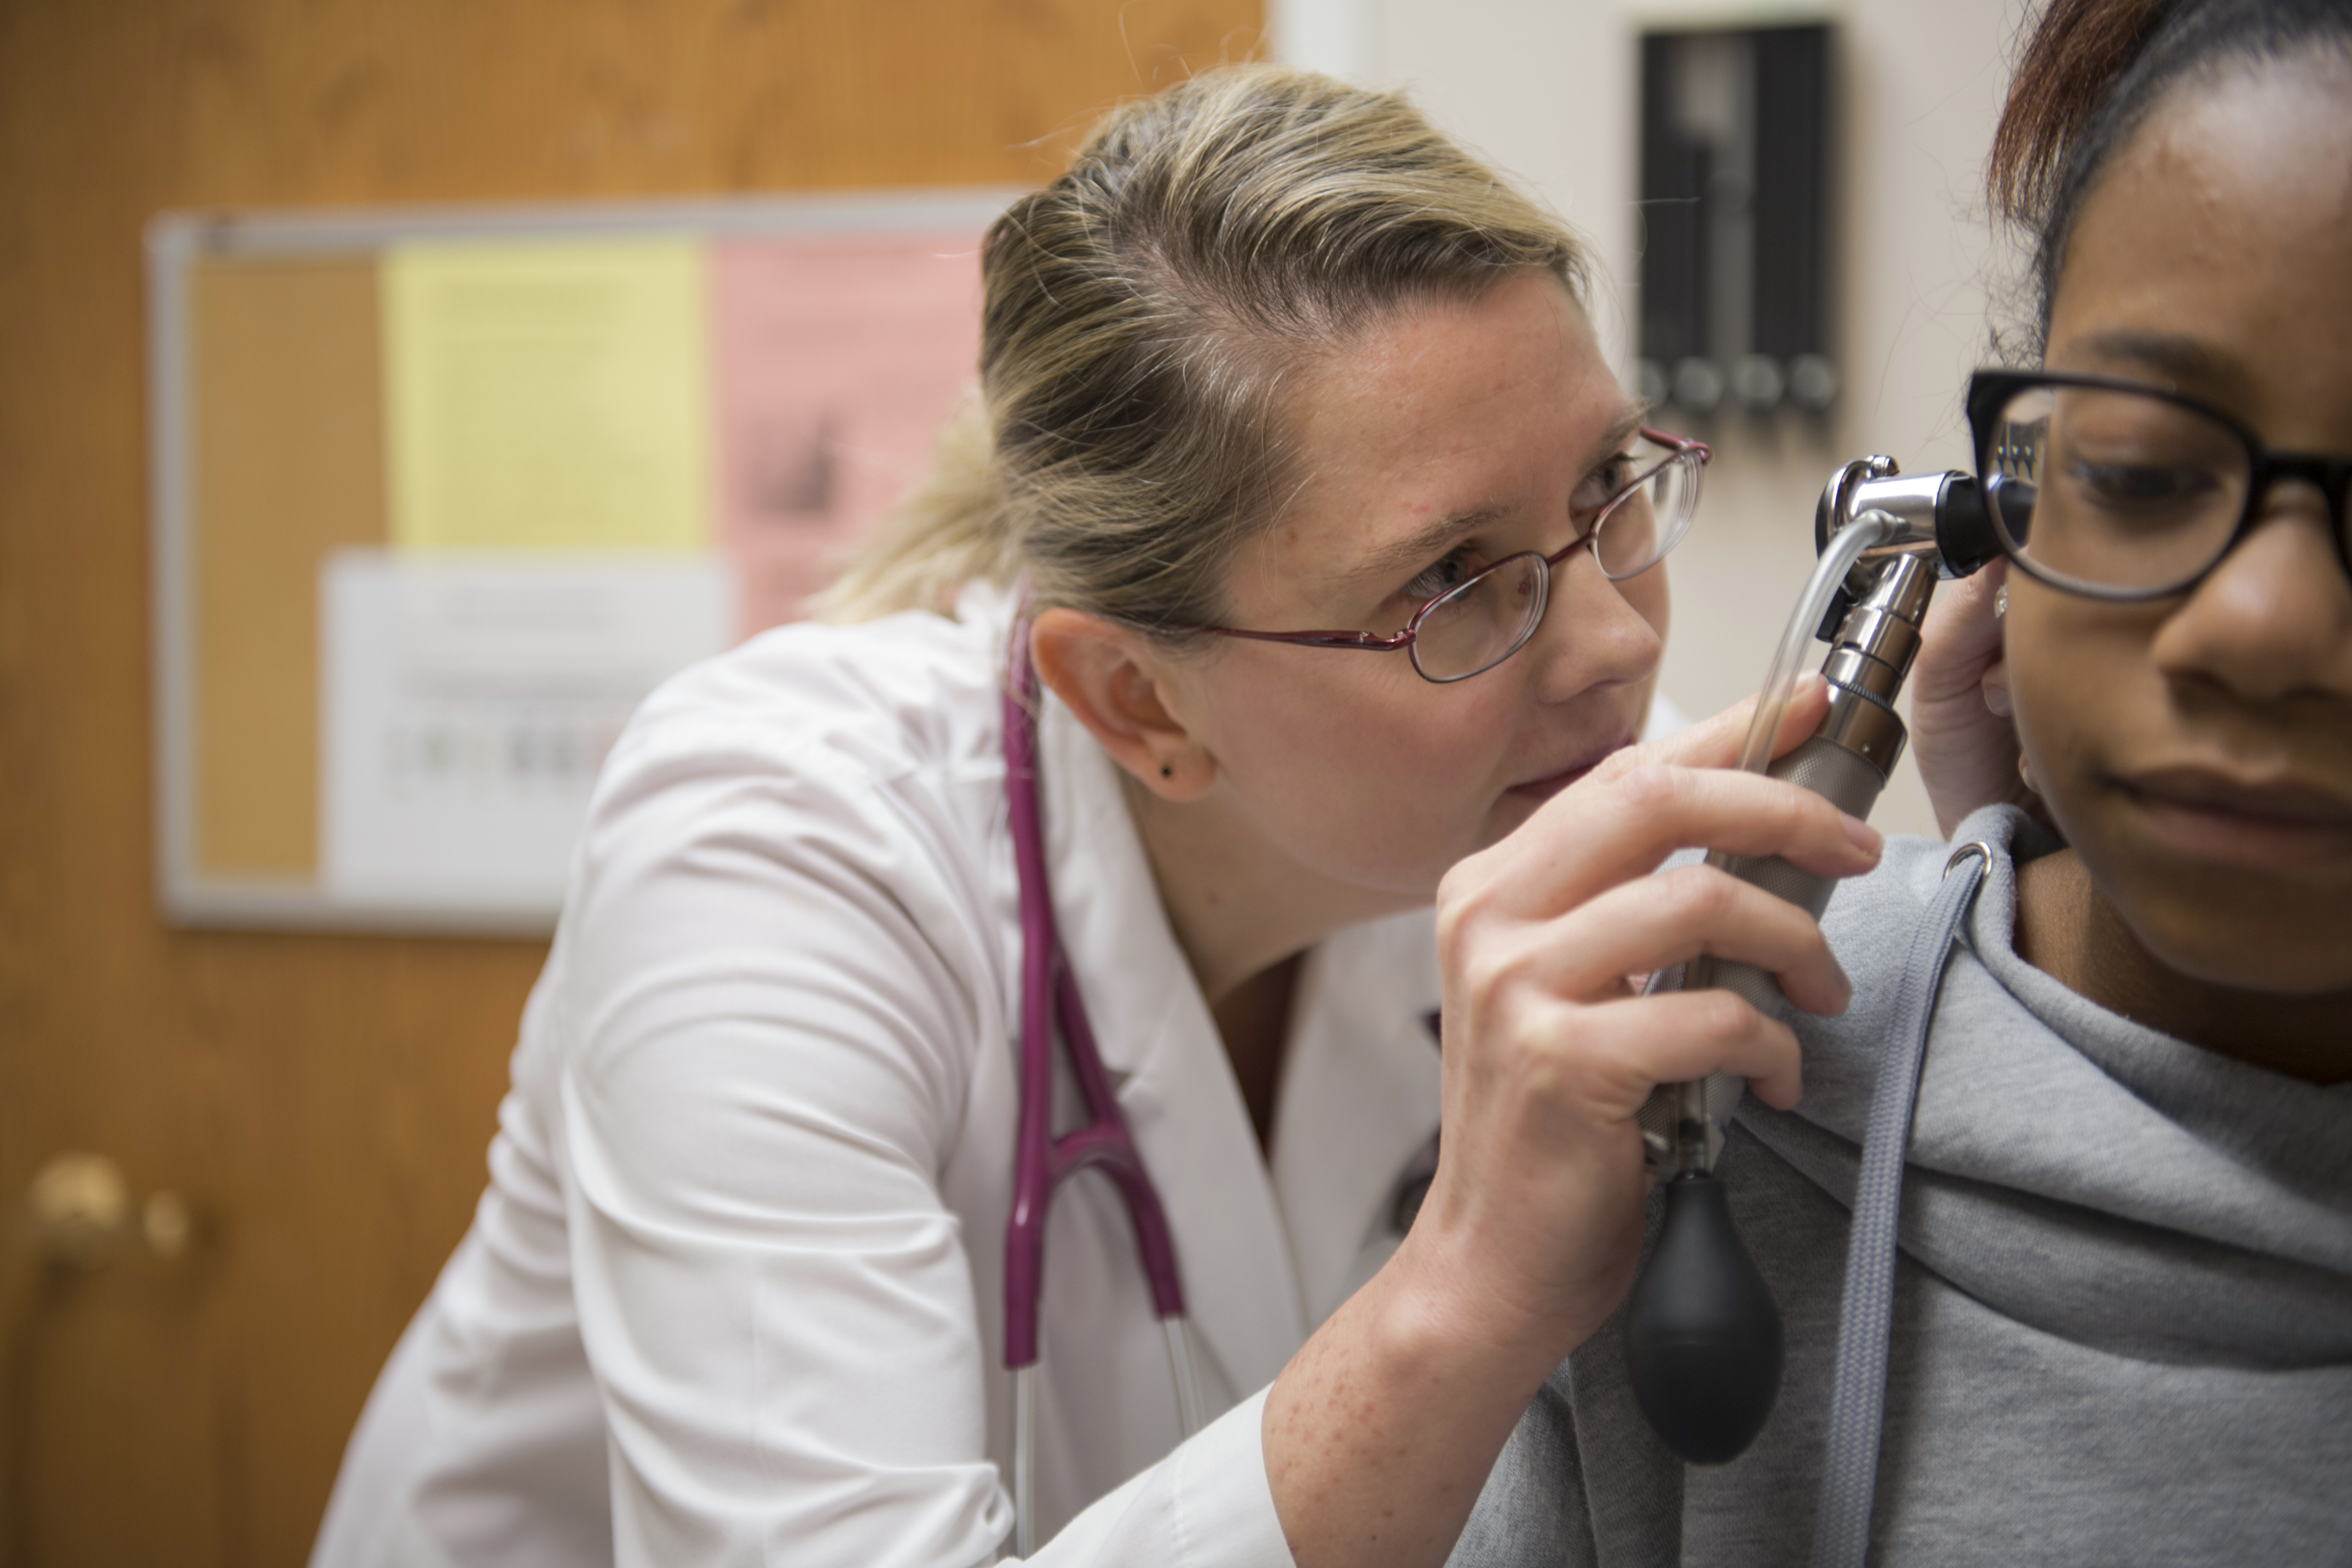 Dr. Magdalena Bilska is looking into the ear of a young patient. 